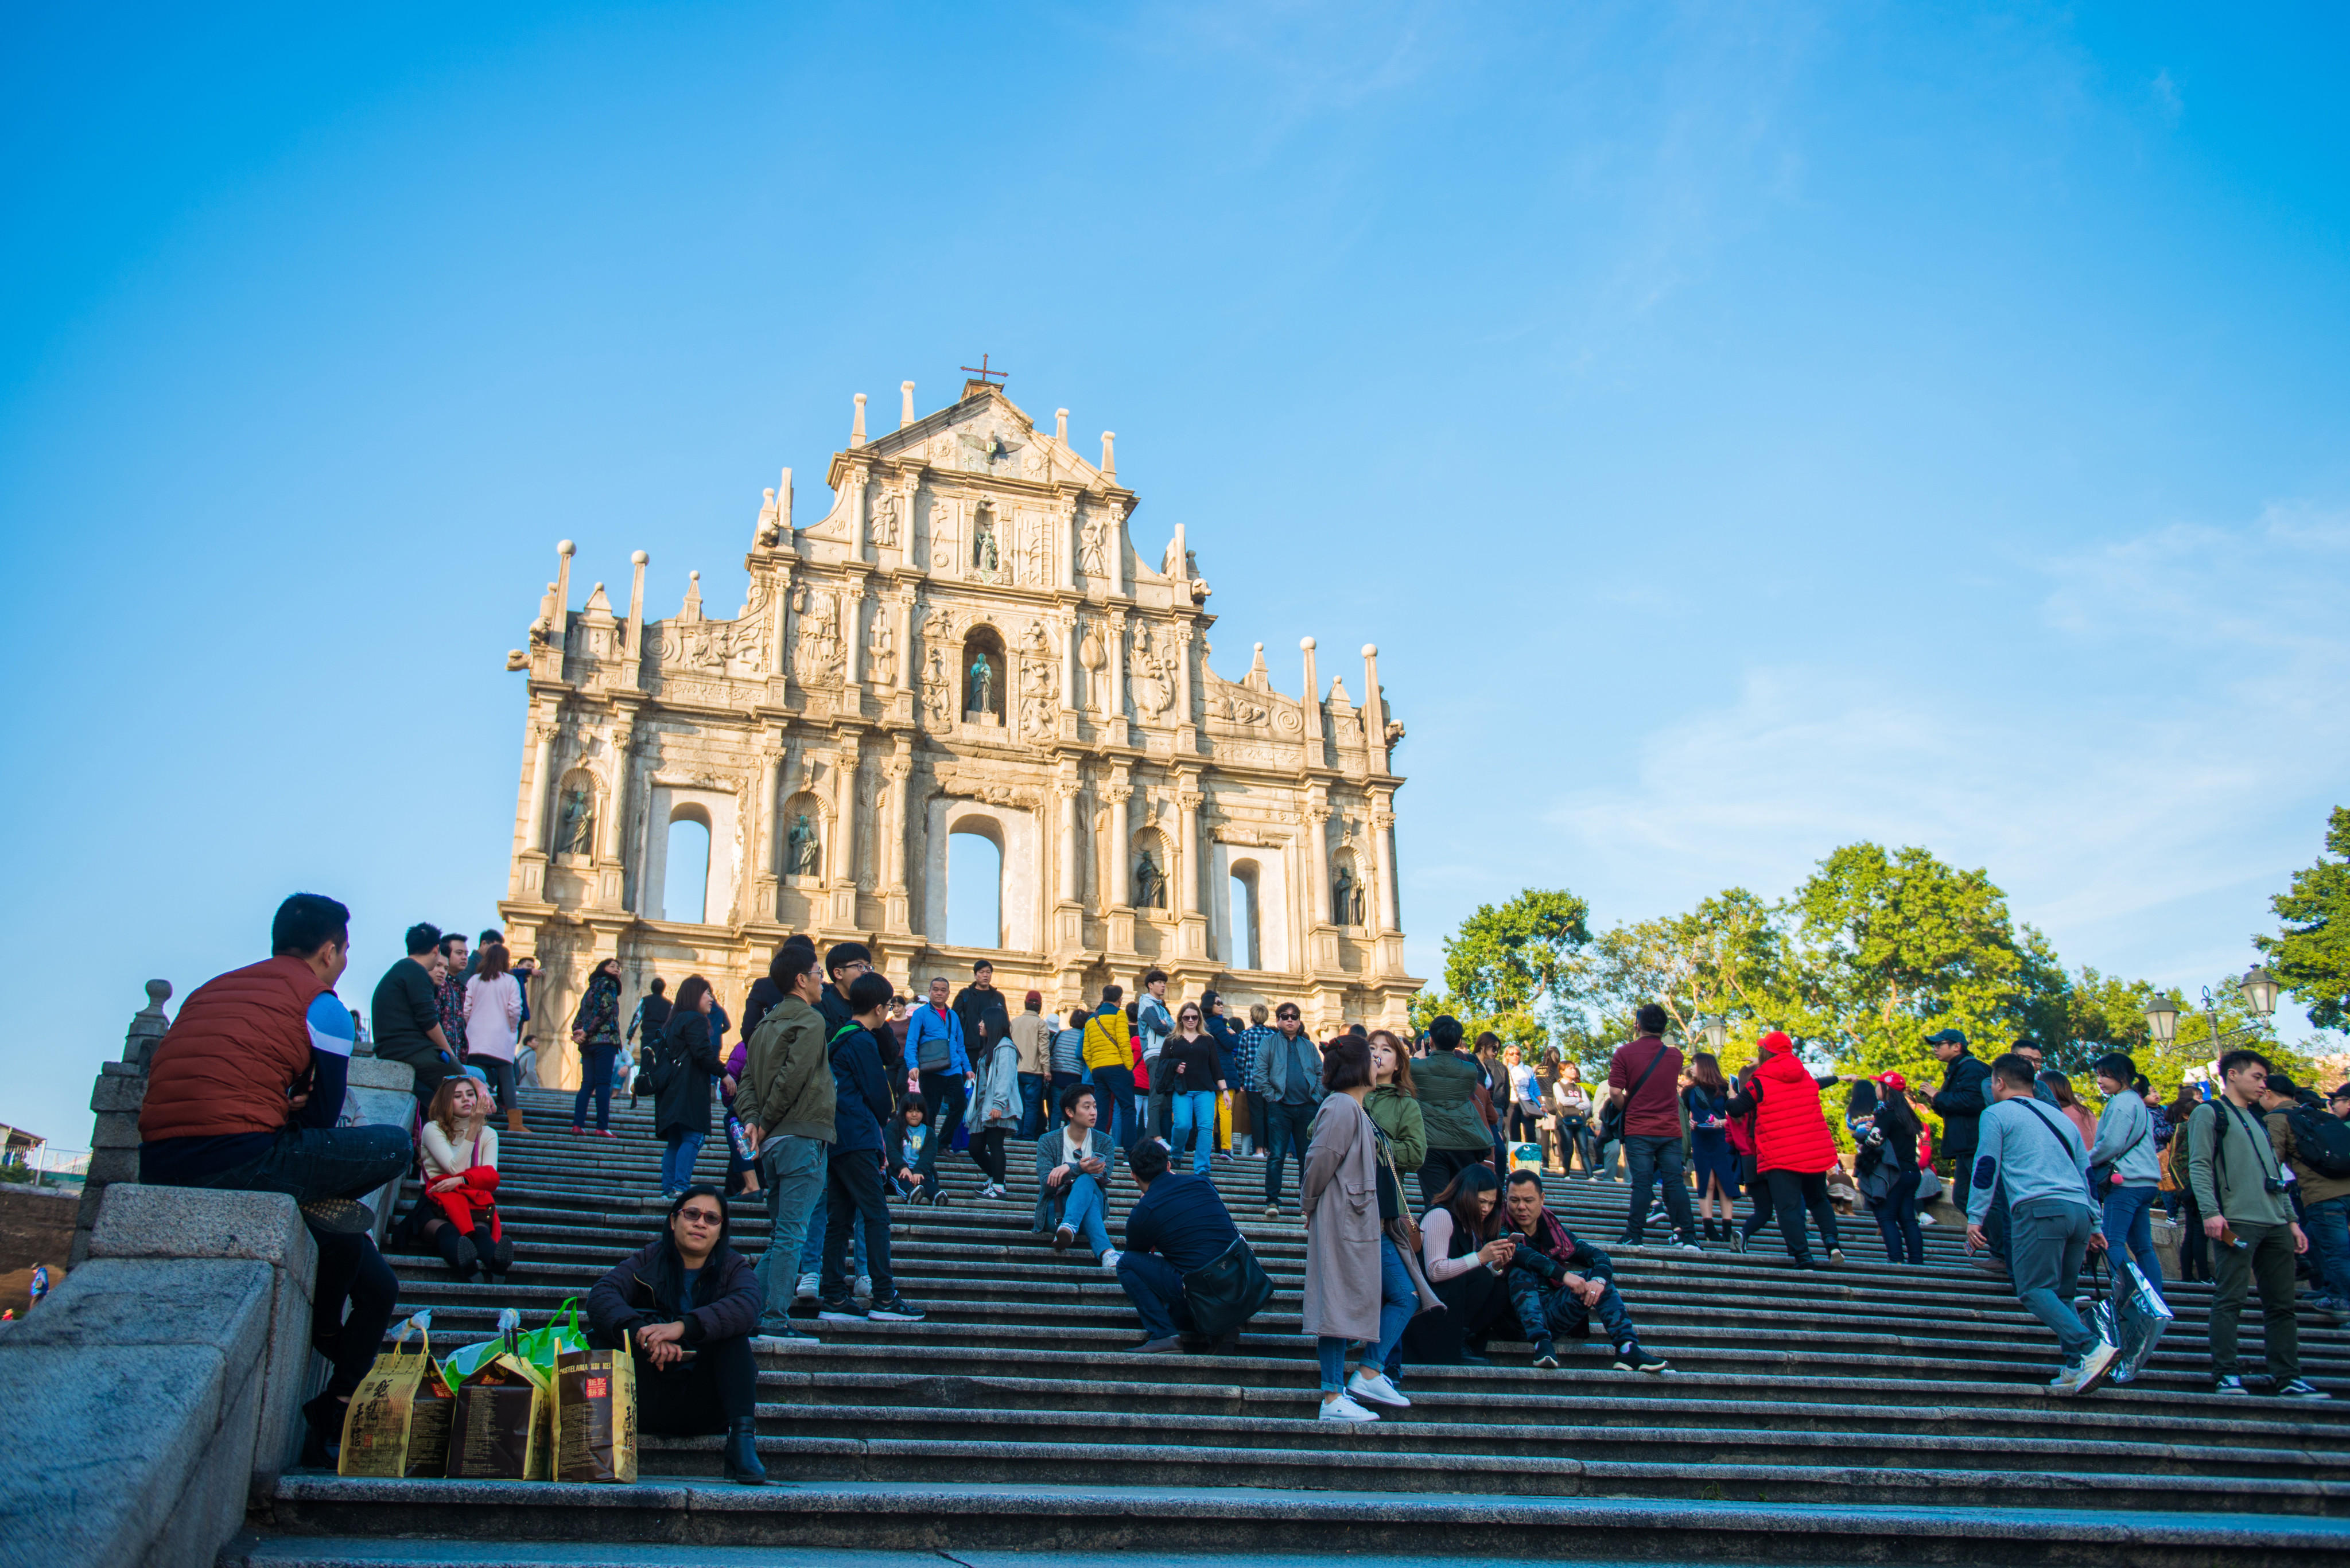 The Macau peninsula is home to fantastic restaurants as well as tourist sites. Photo: Shutterstock